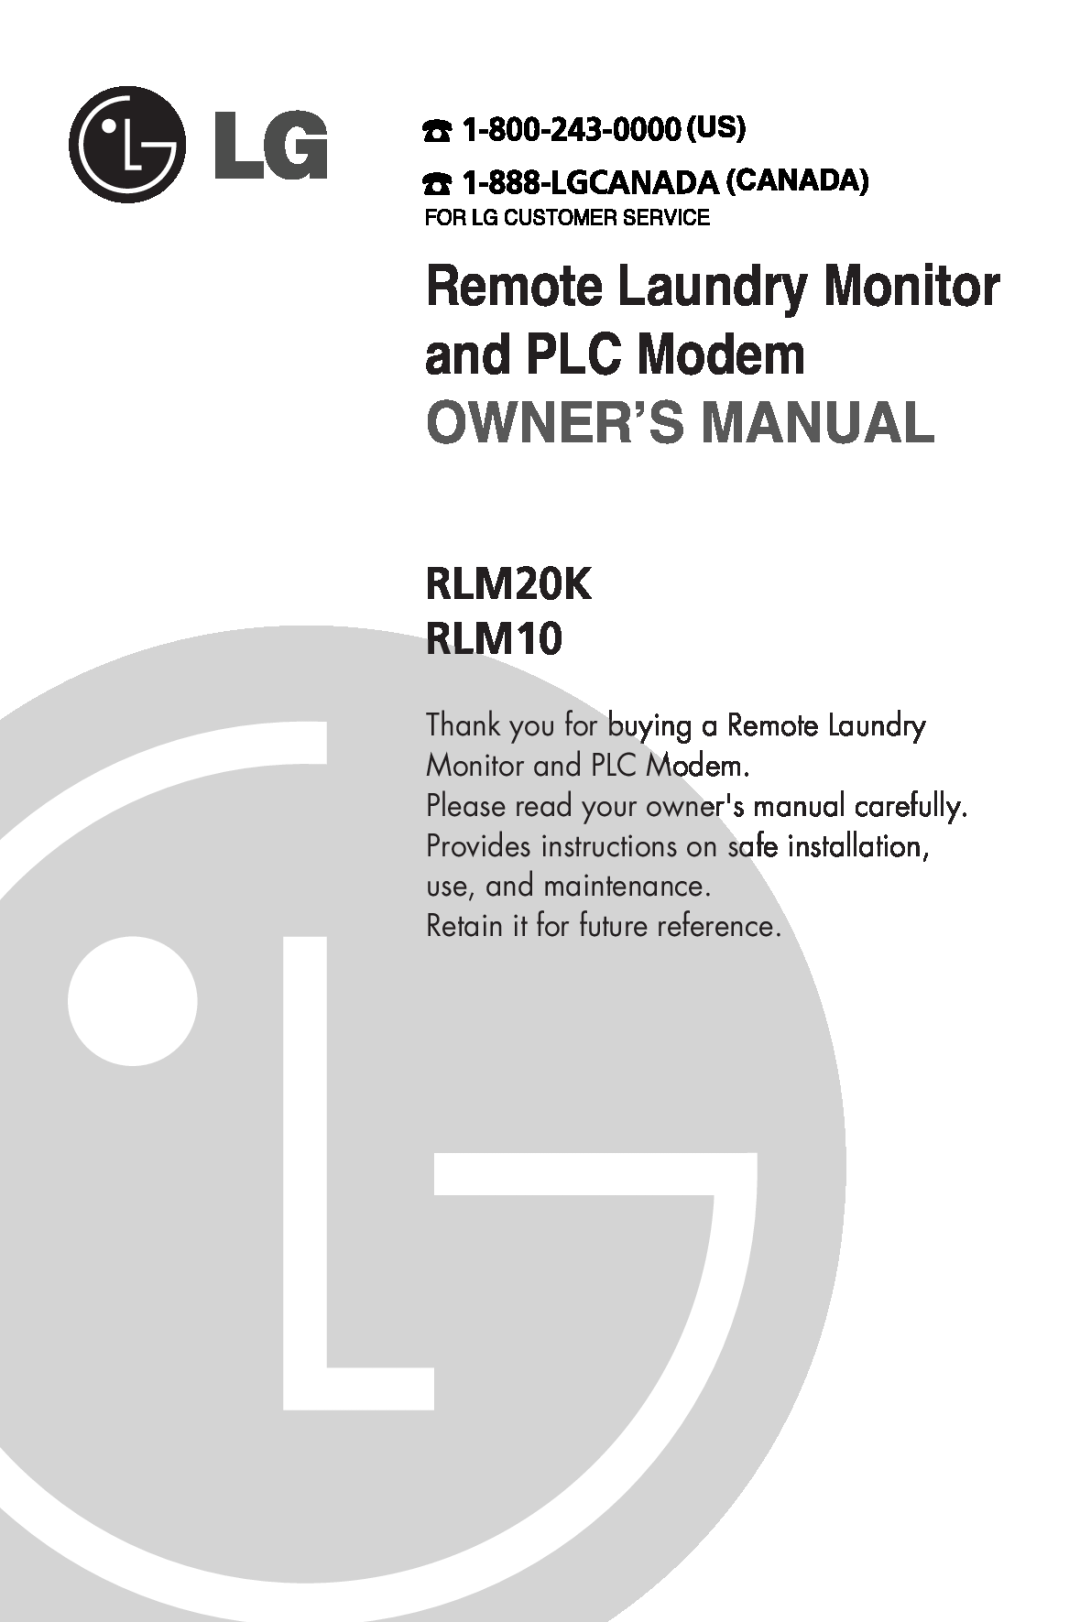 LG Electronics owner manual and PLC Modem, Owner’S Manual, Remote Laundry Monitor, RLM20K RLM10 